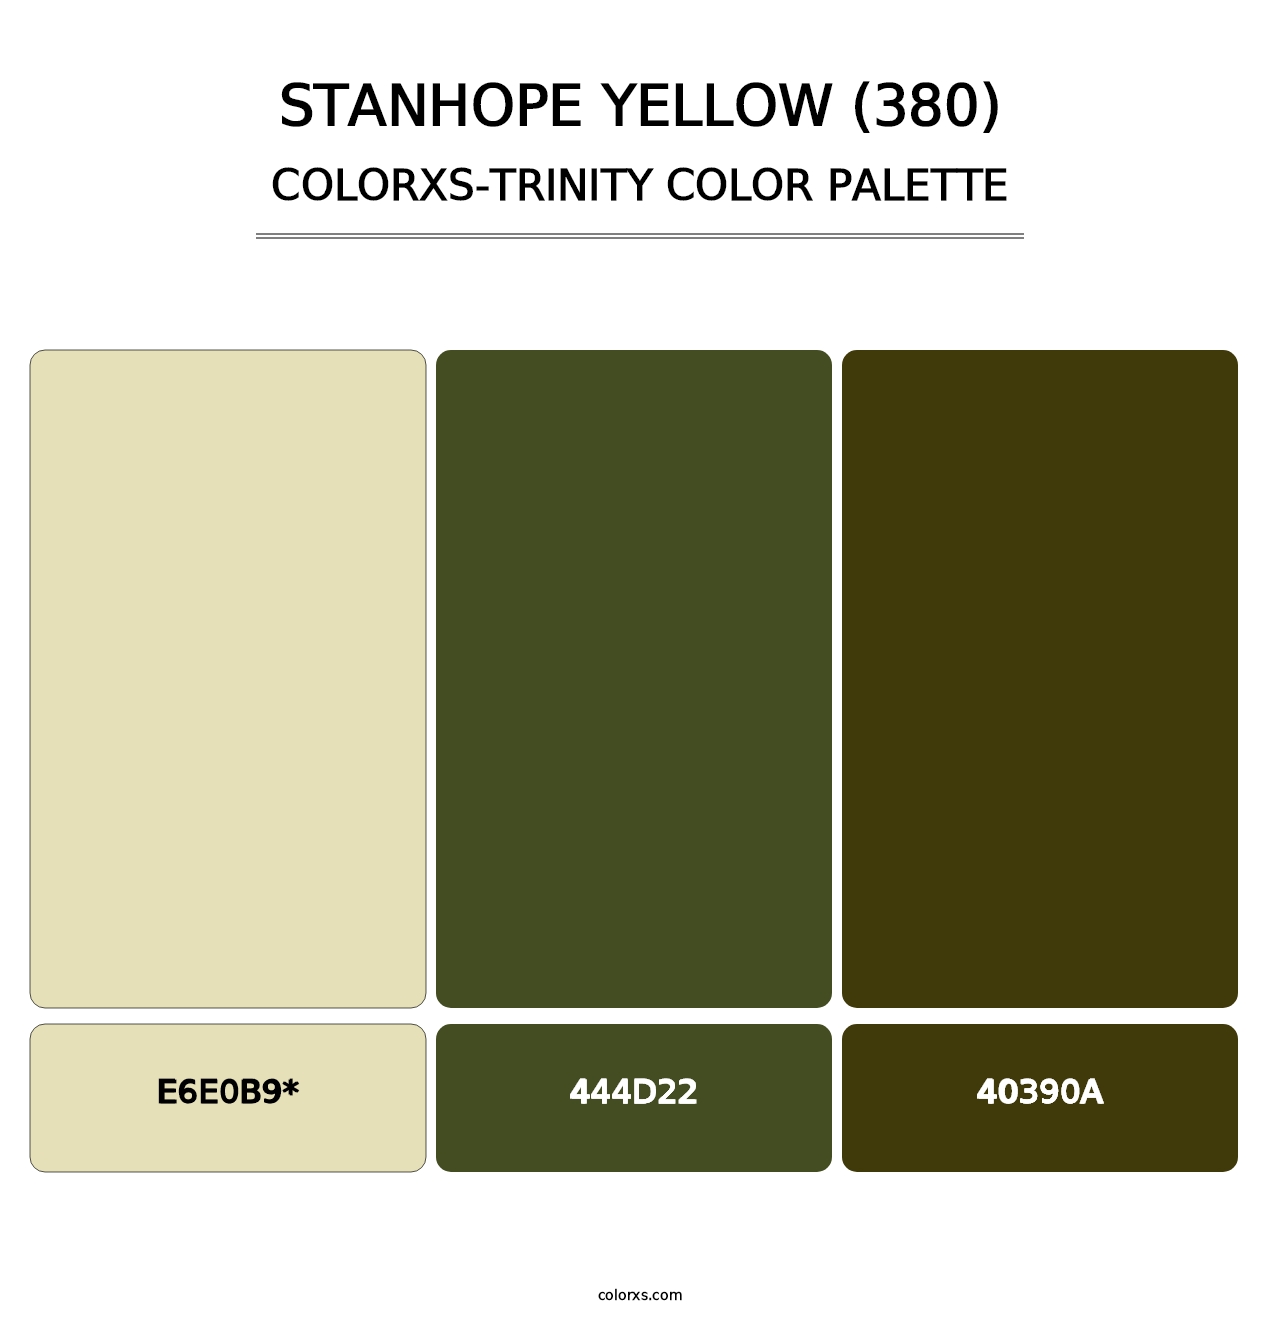 Stanhope Yellow (380) - Colorxs Trinity Palette